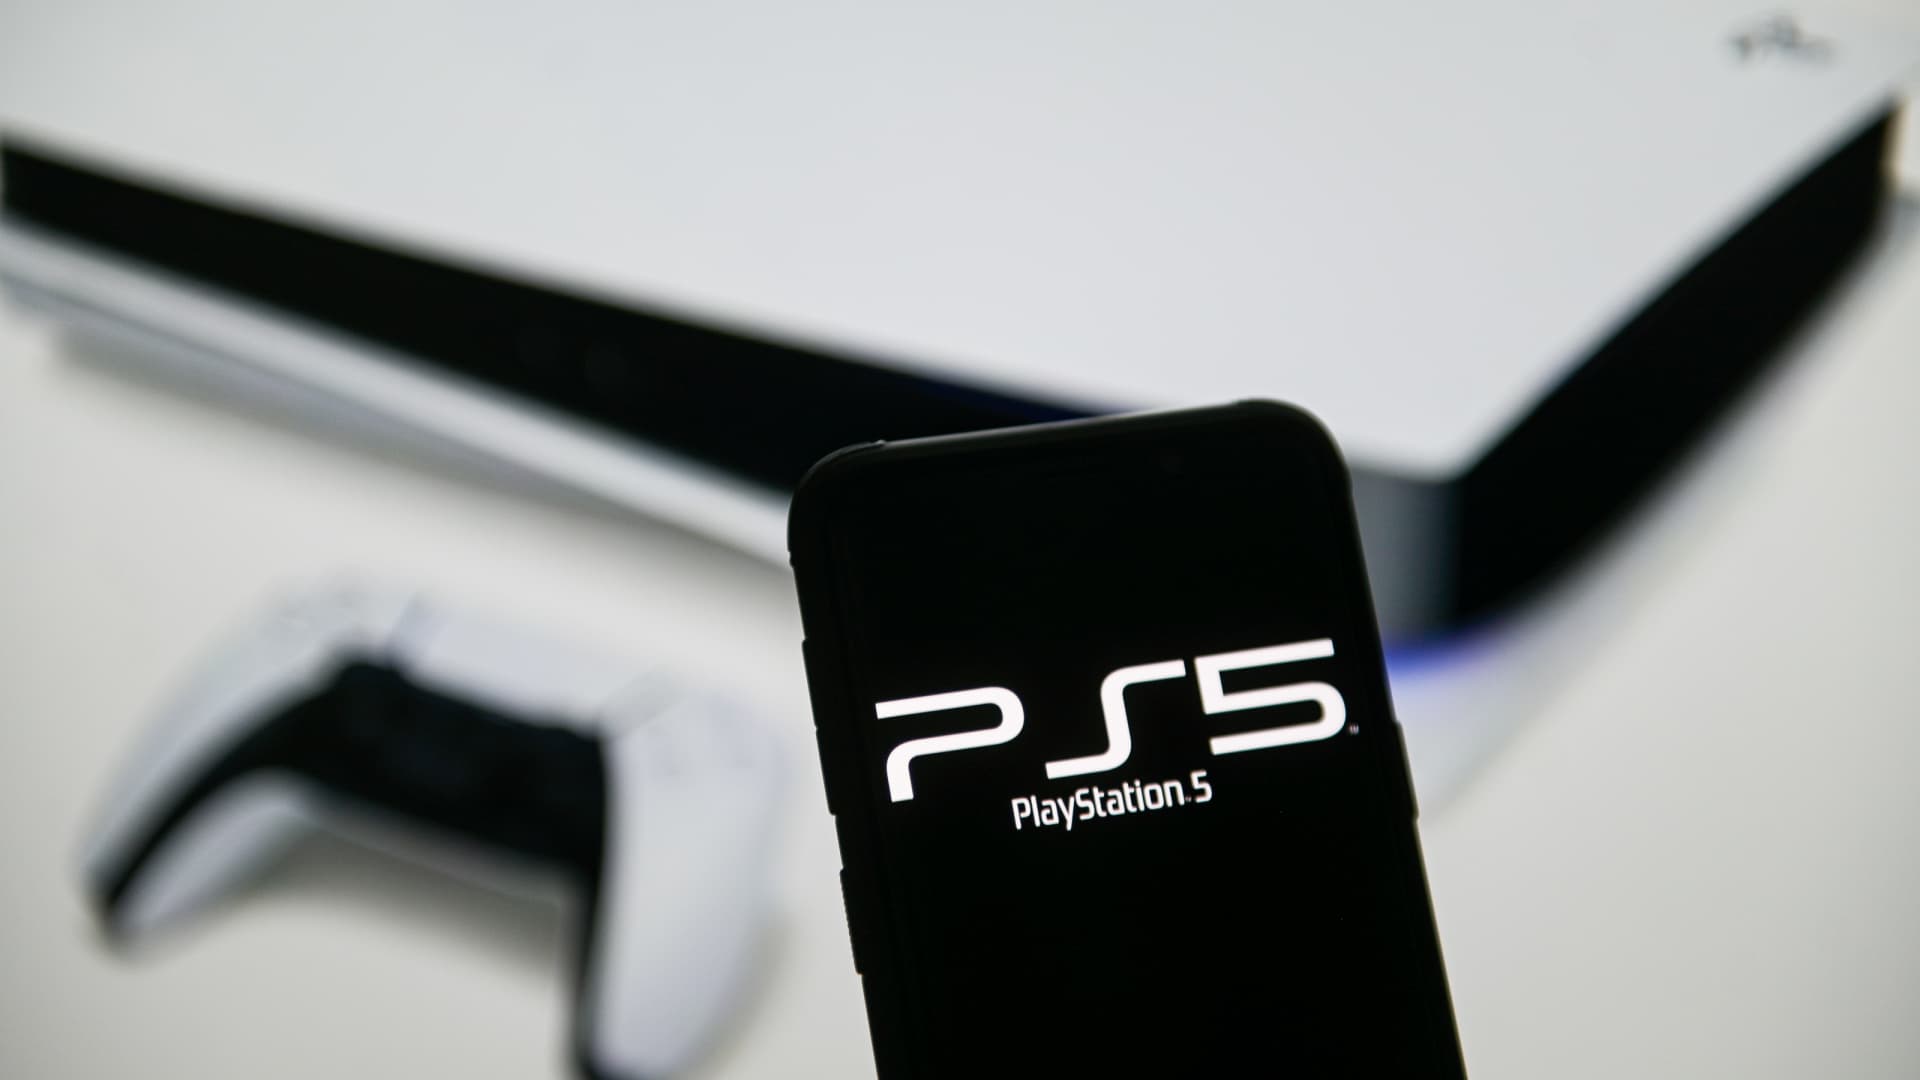 Sony hikes the price of its PlayStation 5 console because of soaring inflation